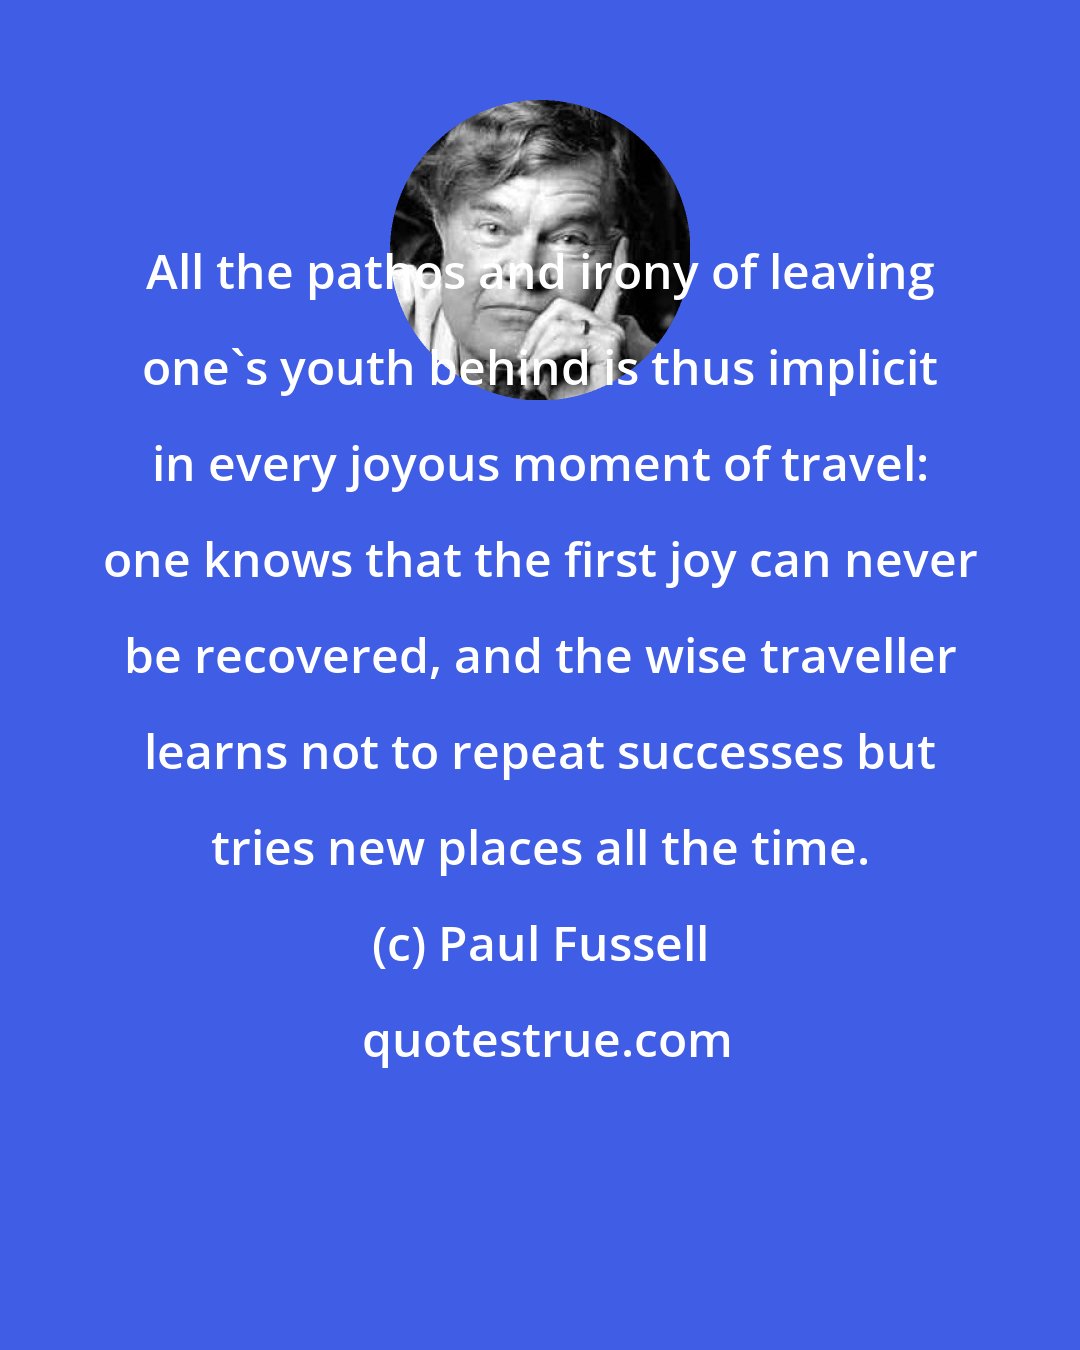 Paul Fussell: All the pathos and irony of leaving one's youth behind is thus implicit in every joyous moment of travel: one knows that the first joy can never be recovered, and the wise traveller learns not to repeat successes but tries new places all the time.